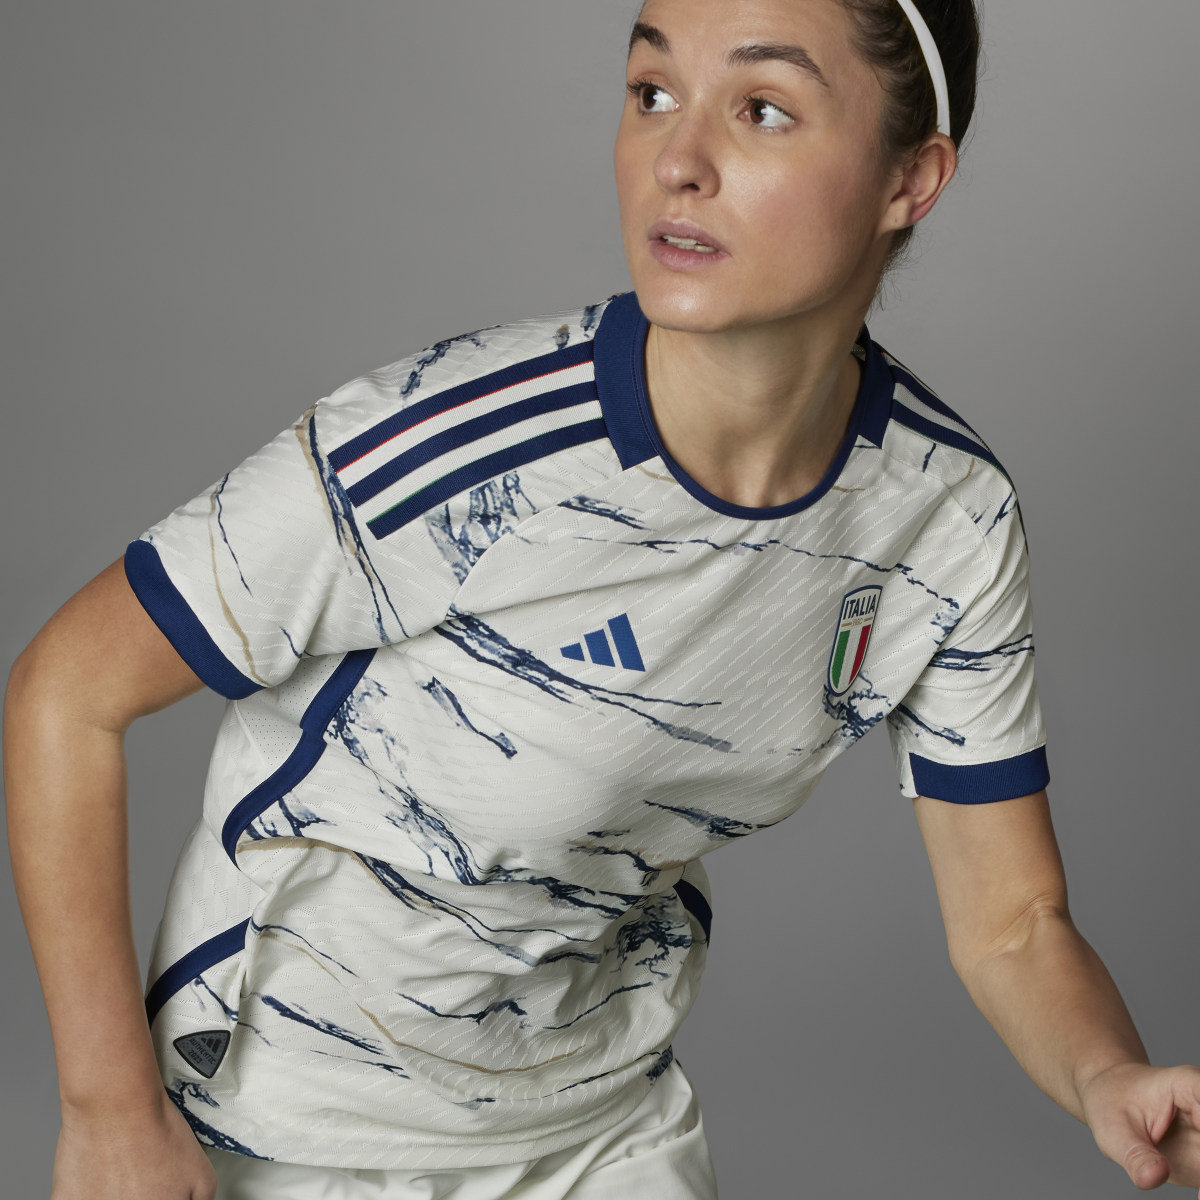 Adidas Italy Women's Team 23 Away Authentic Jersey. 5